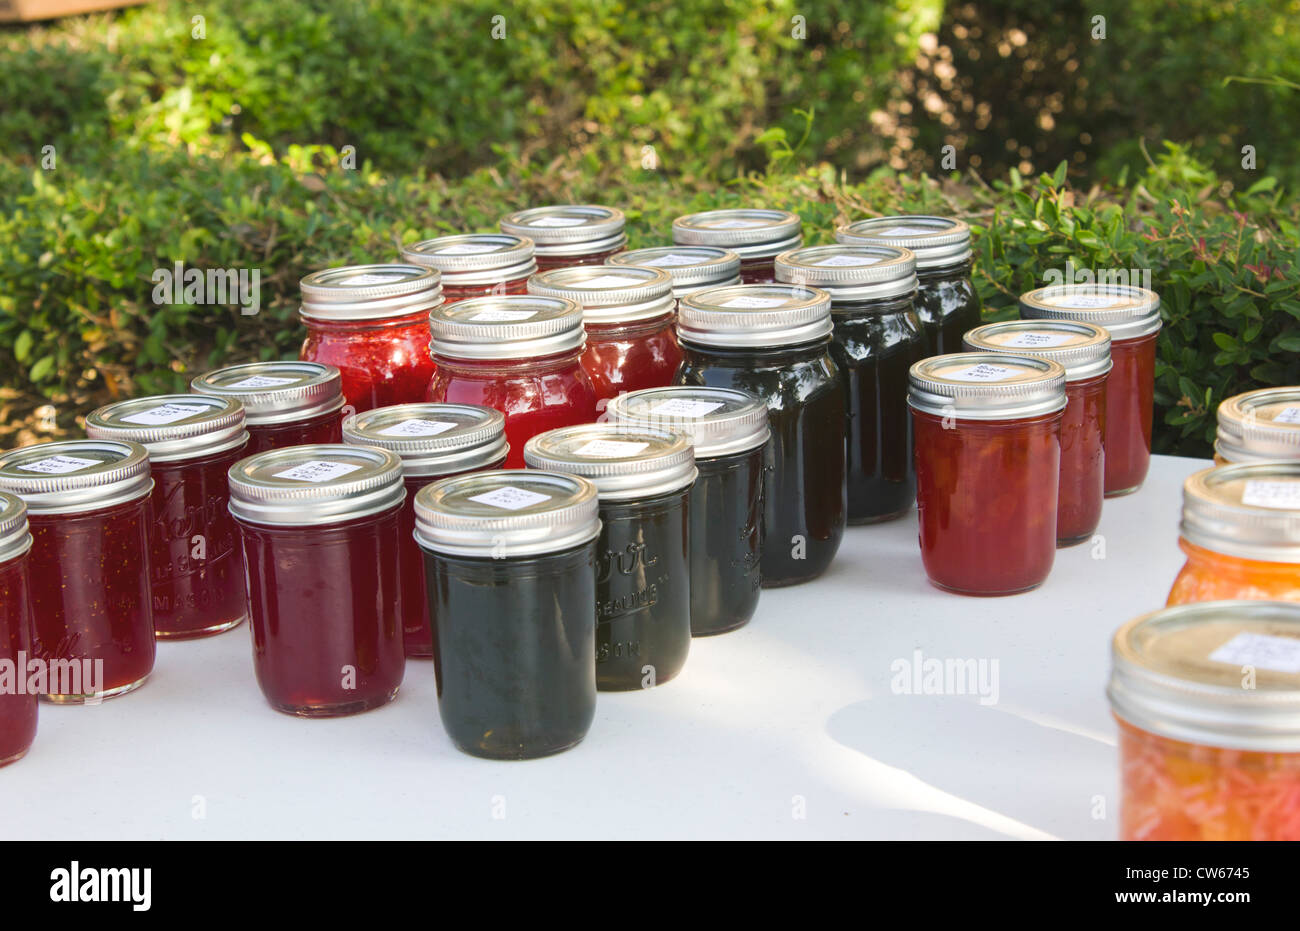 Preserves for sale at farmers market Stock Photo